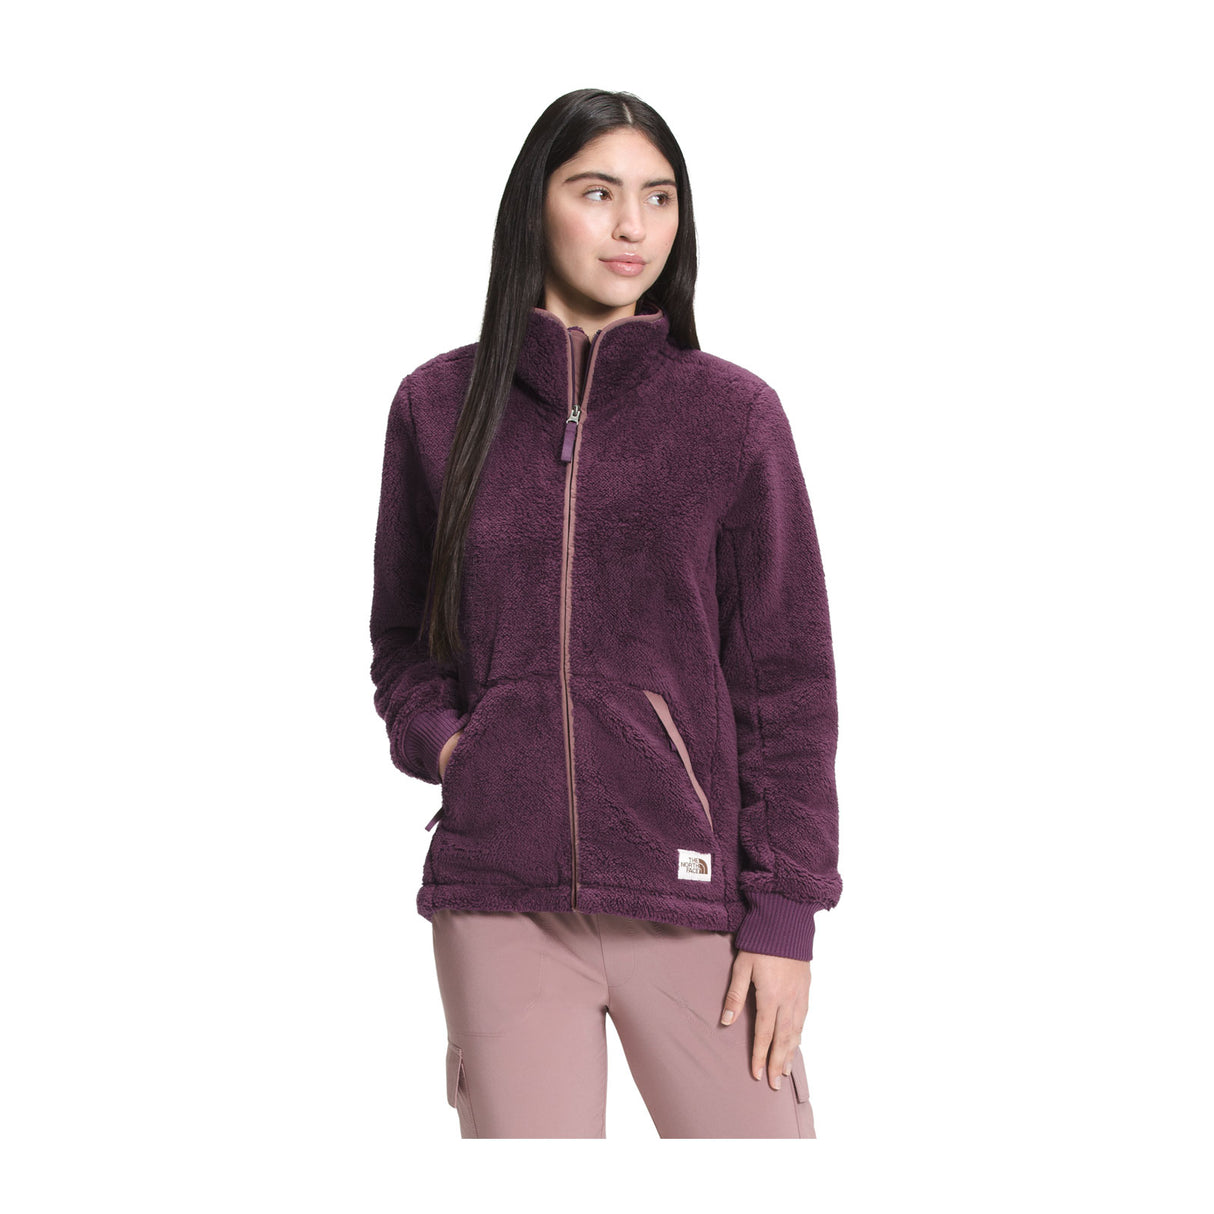 The North Face Campshire Full Zip Jacket (Women) - Blackberry Wine/Twilight Mauve Apparel - Jacket - Lightweight - The Heel Shoe Fitters